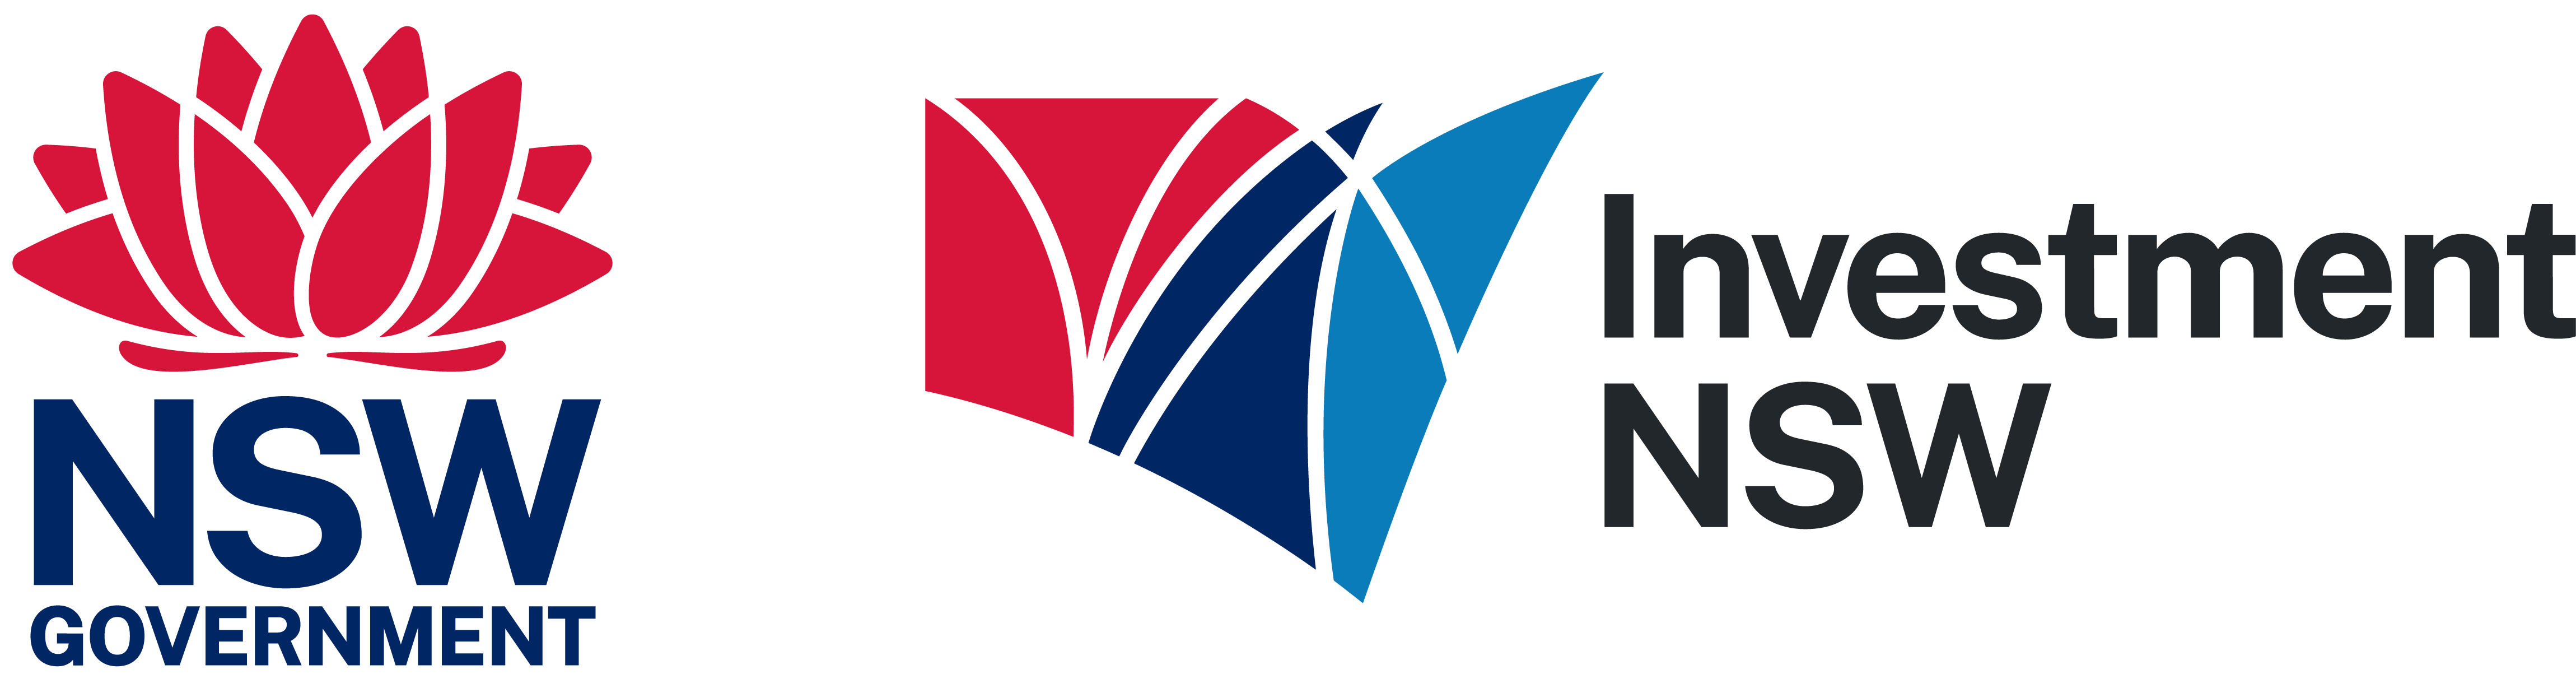 Investment NSW logo coloured